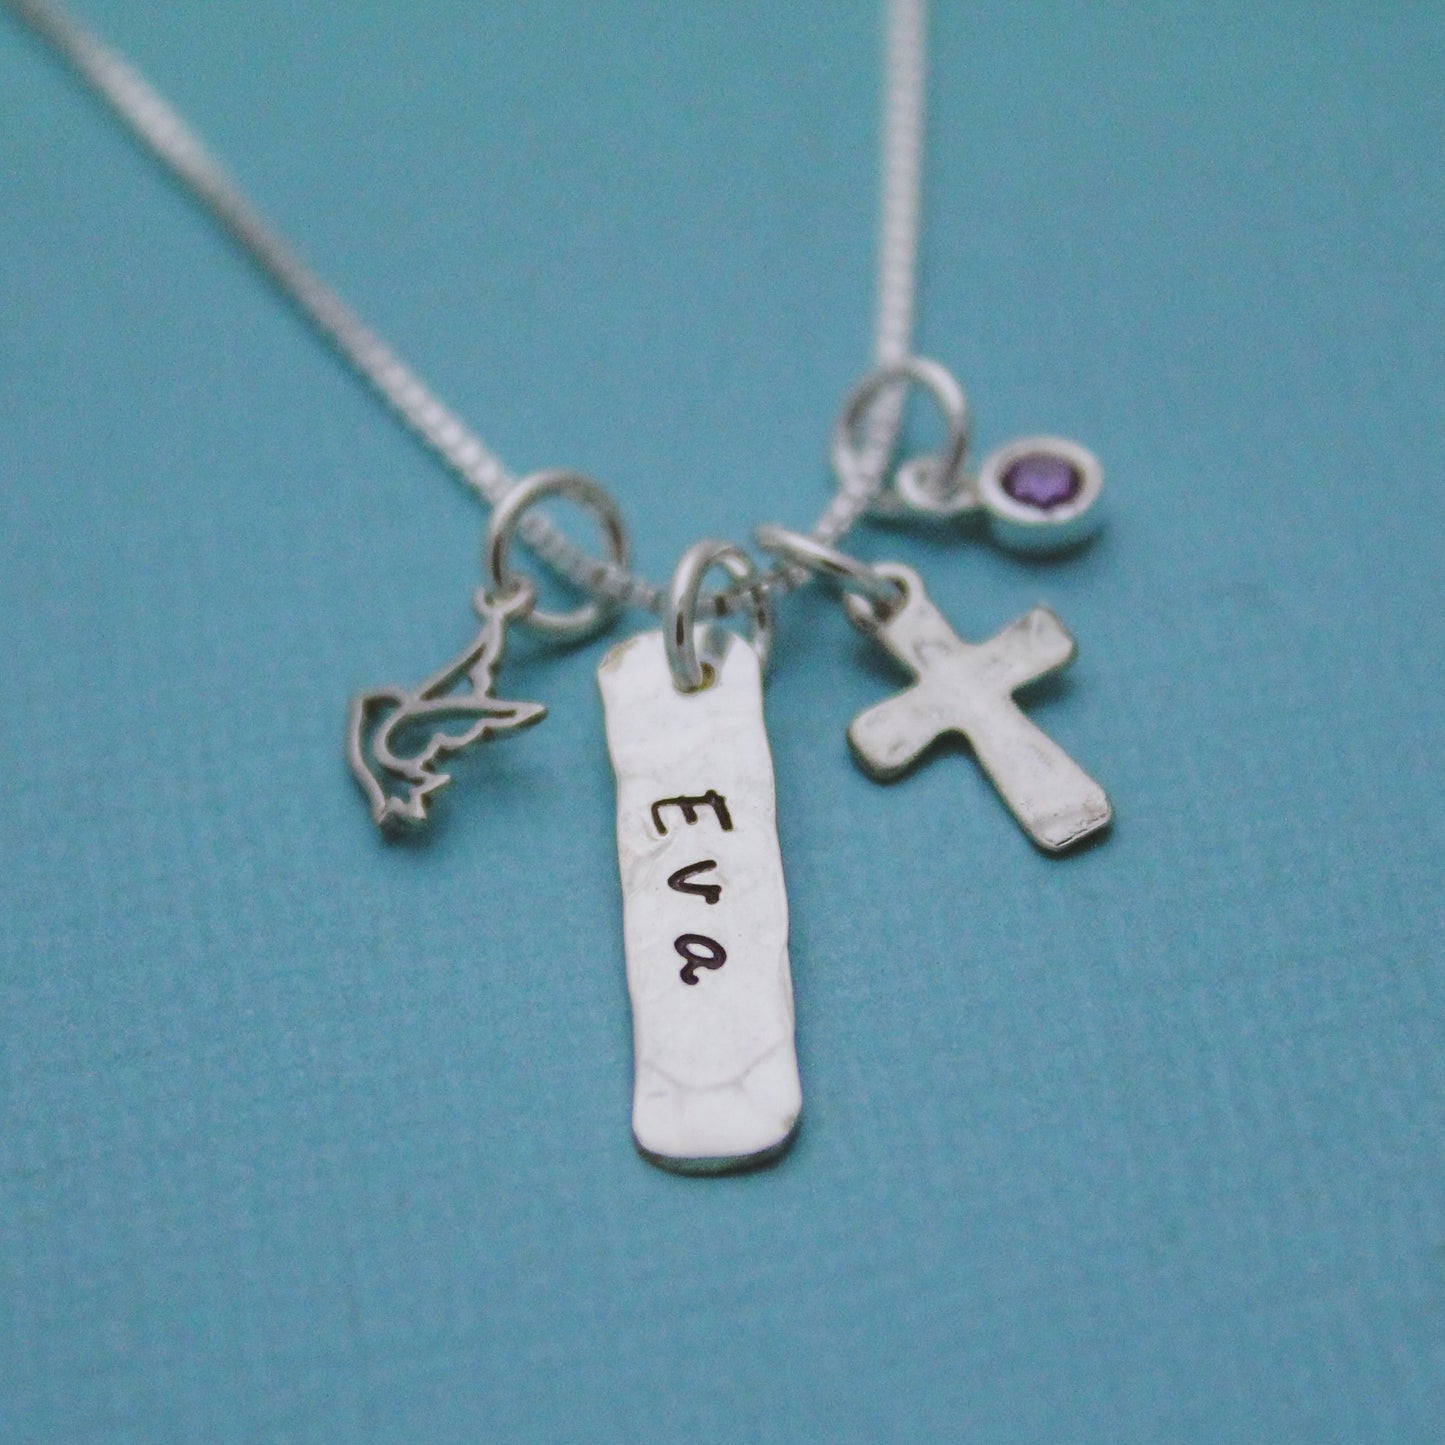 Dove and Cross Tag Necklace with Birthstone or Pearl for Confirmation Personalized Sterling Silver Hand Stamped Jewelry